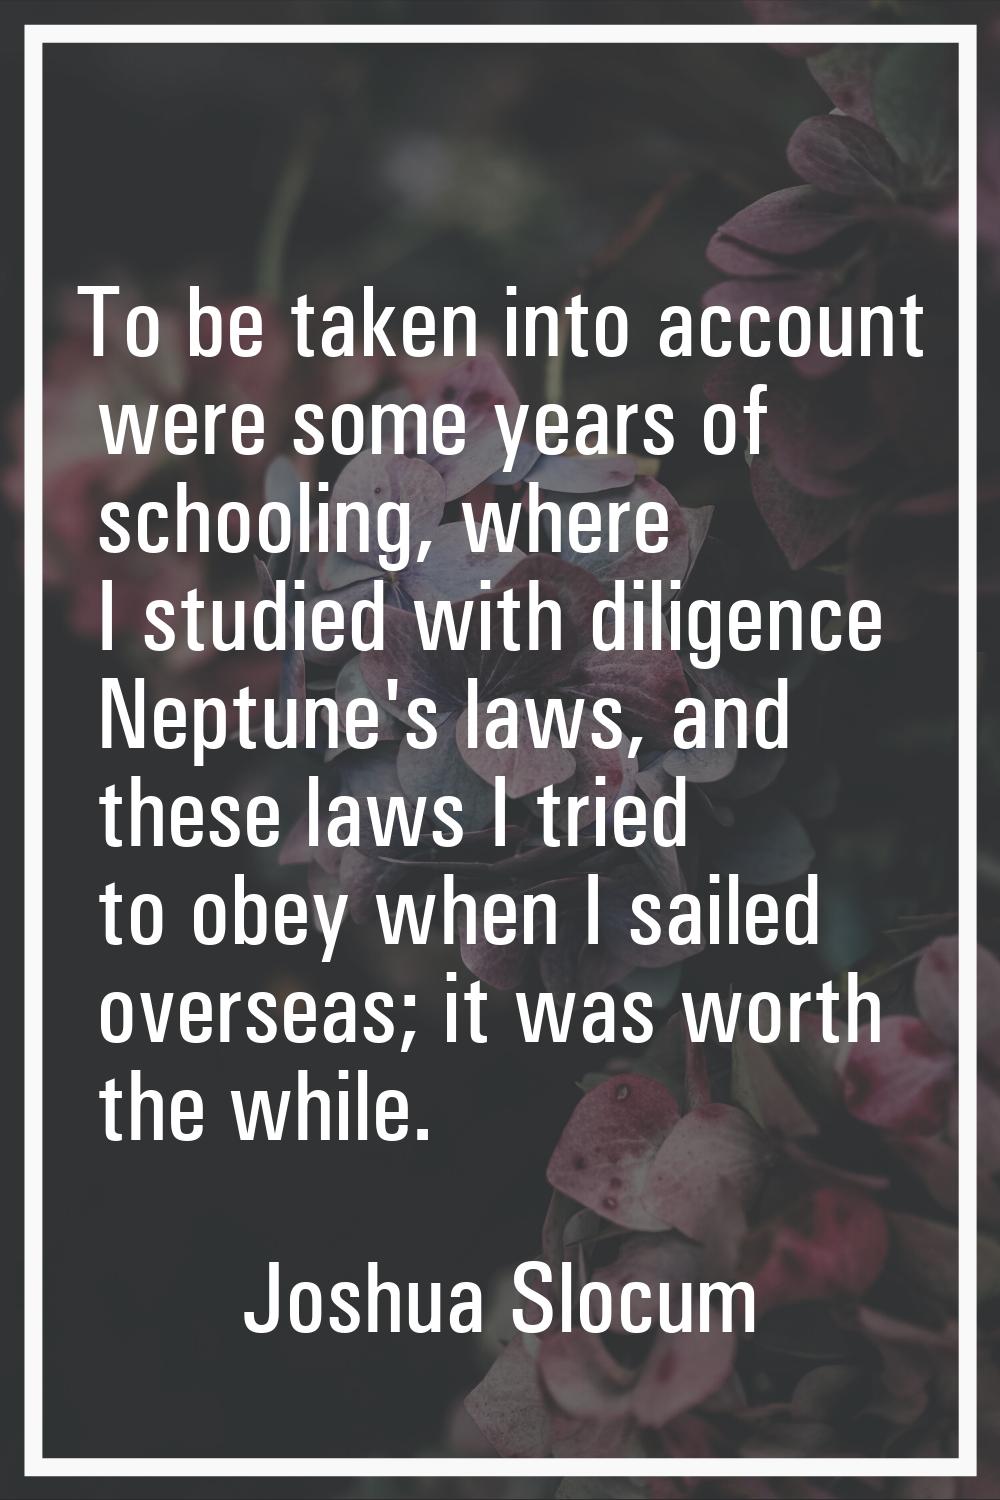 To be taken into account were some years of schooling, where I studied with diligence Neptune's law